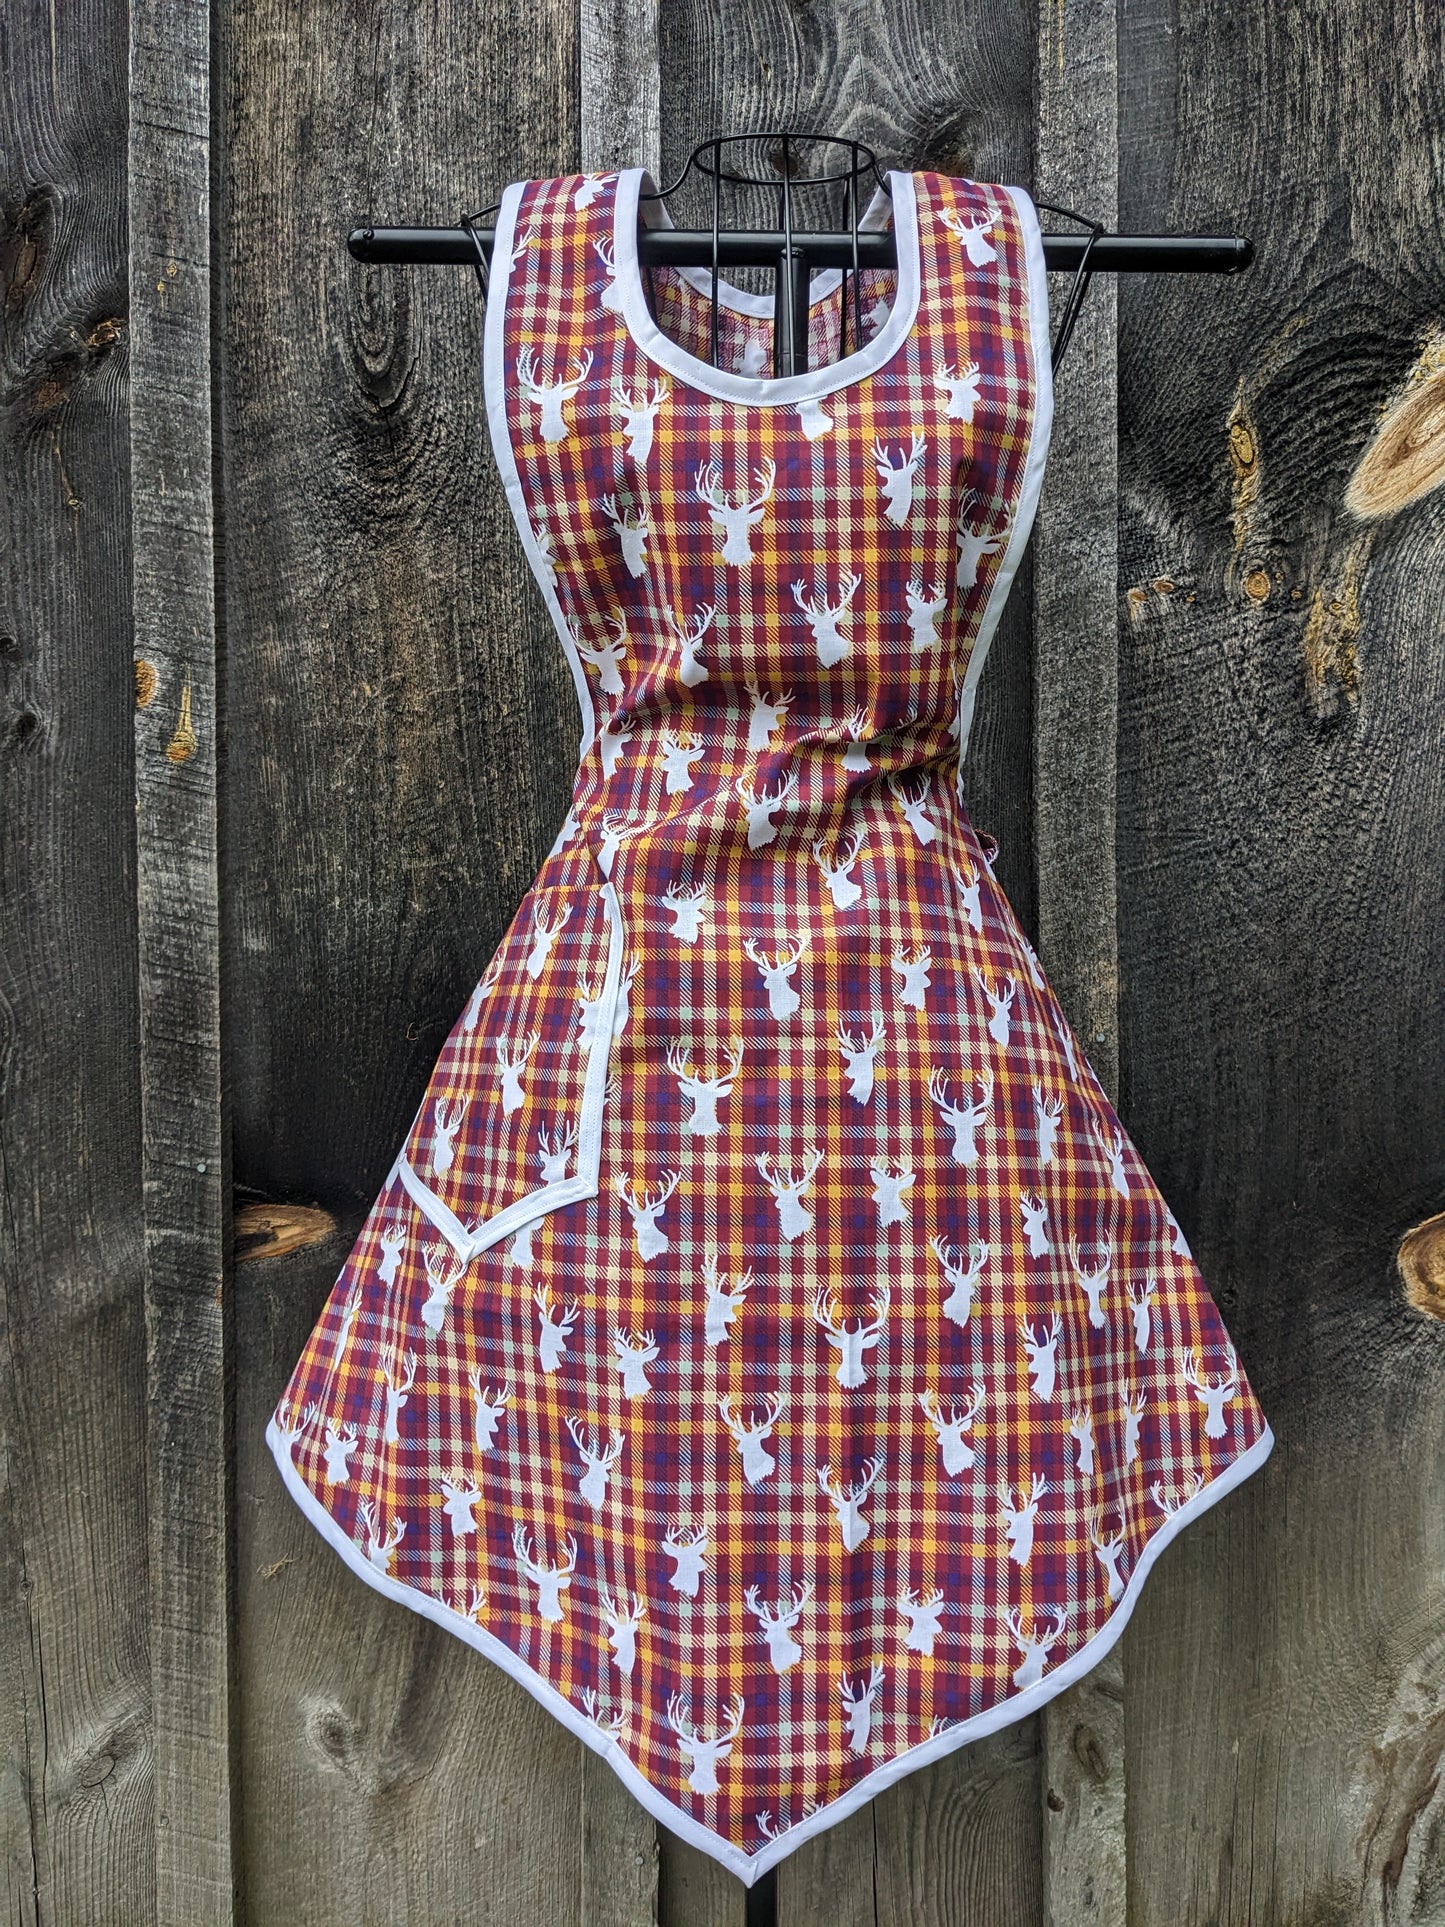 Stag's Head and Plaid Vintage Inspired Apron